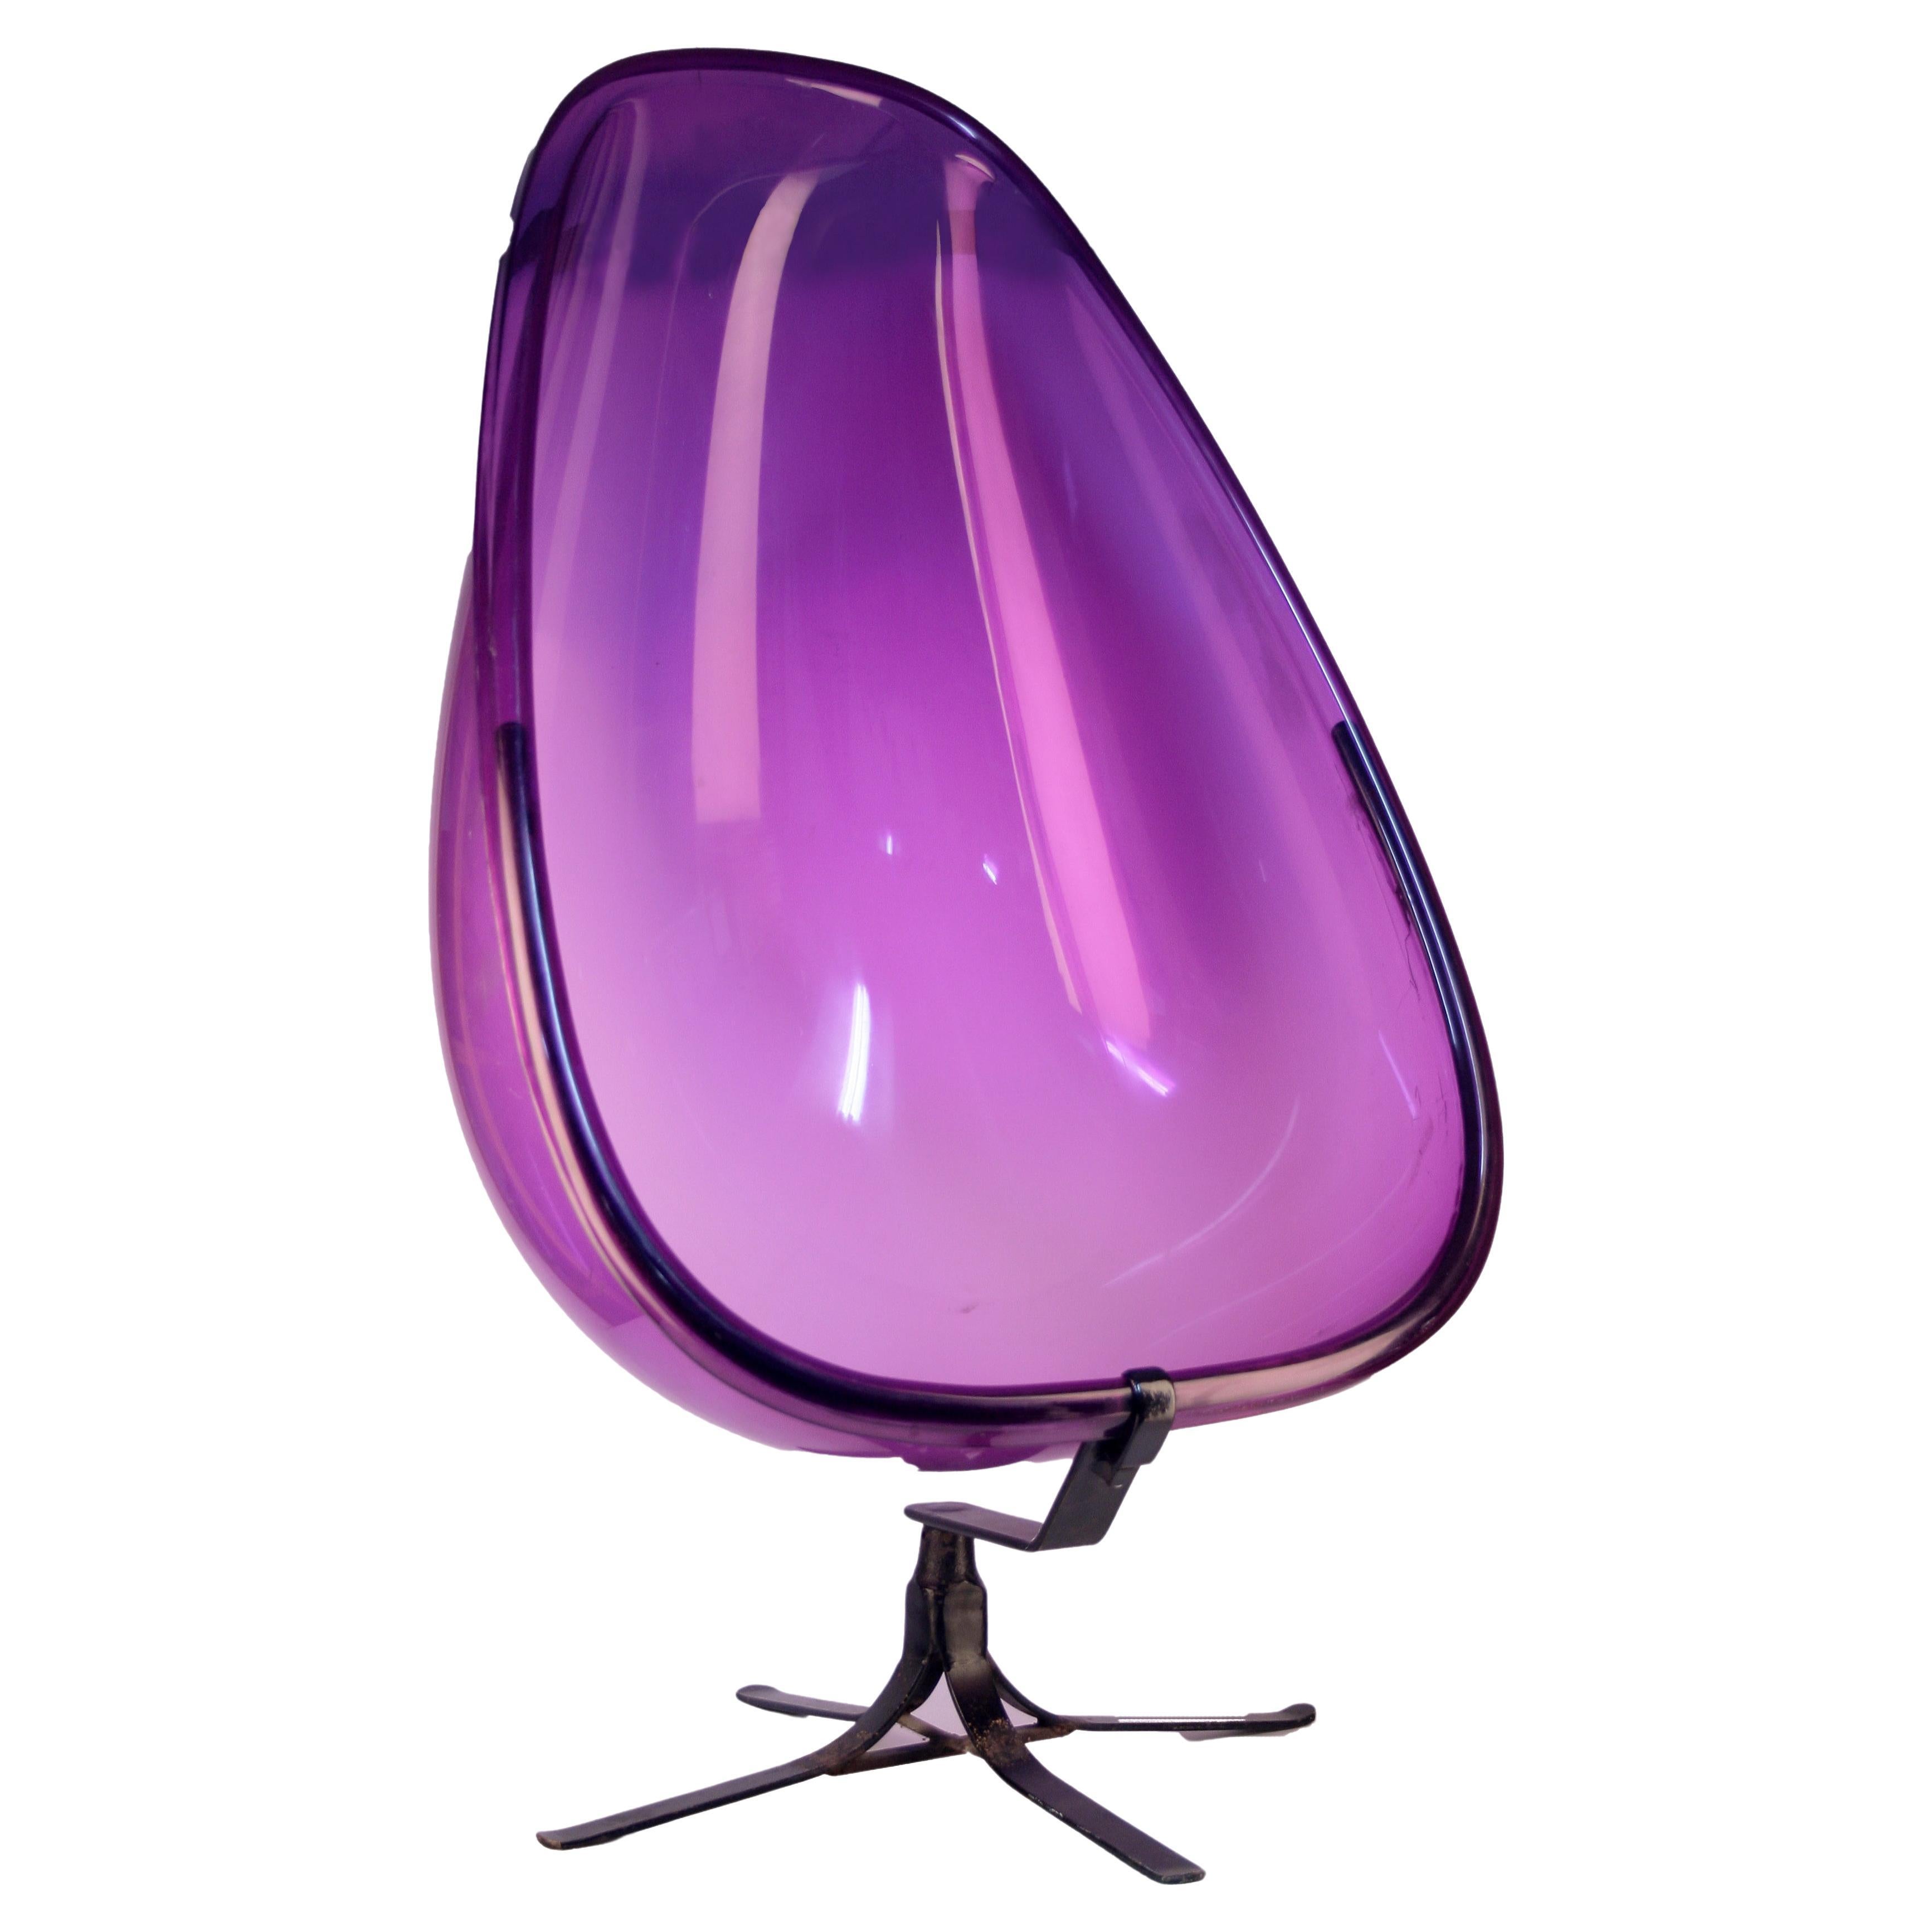 Mid-20th C. Modern American Egg Shaped Acrylic Purple Chair with Iron Legs